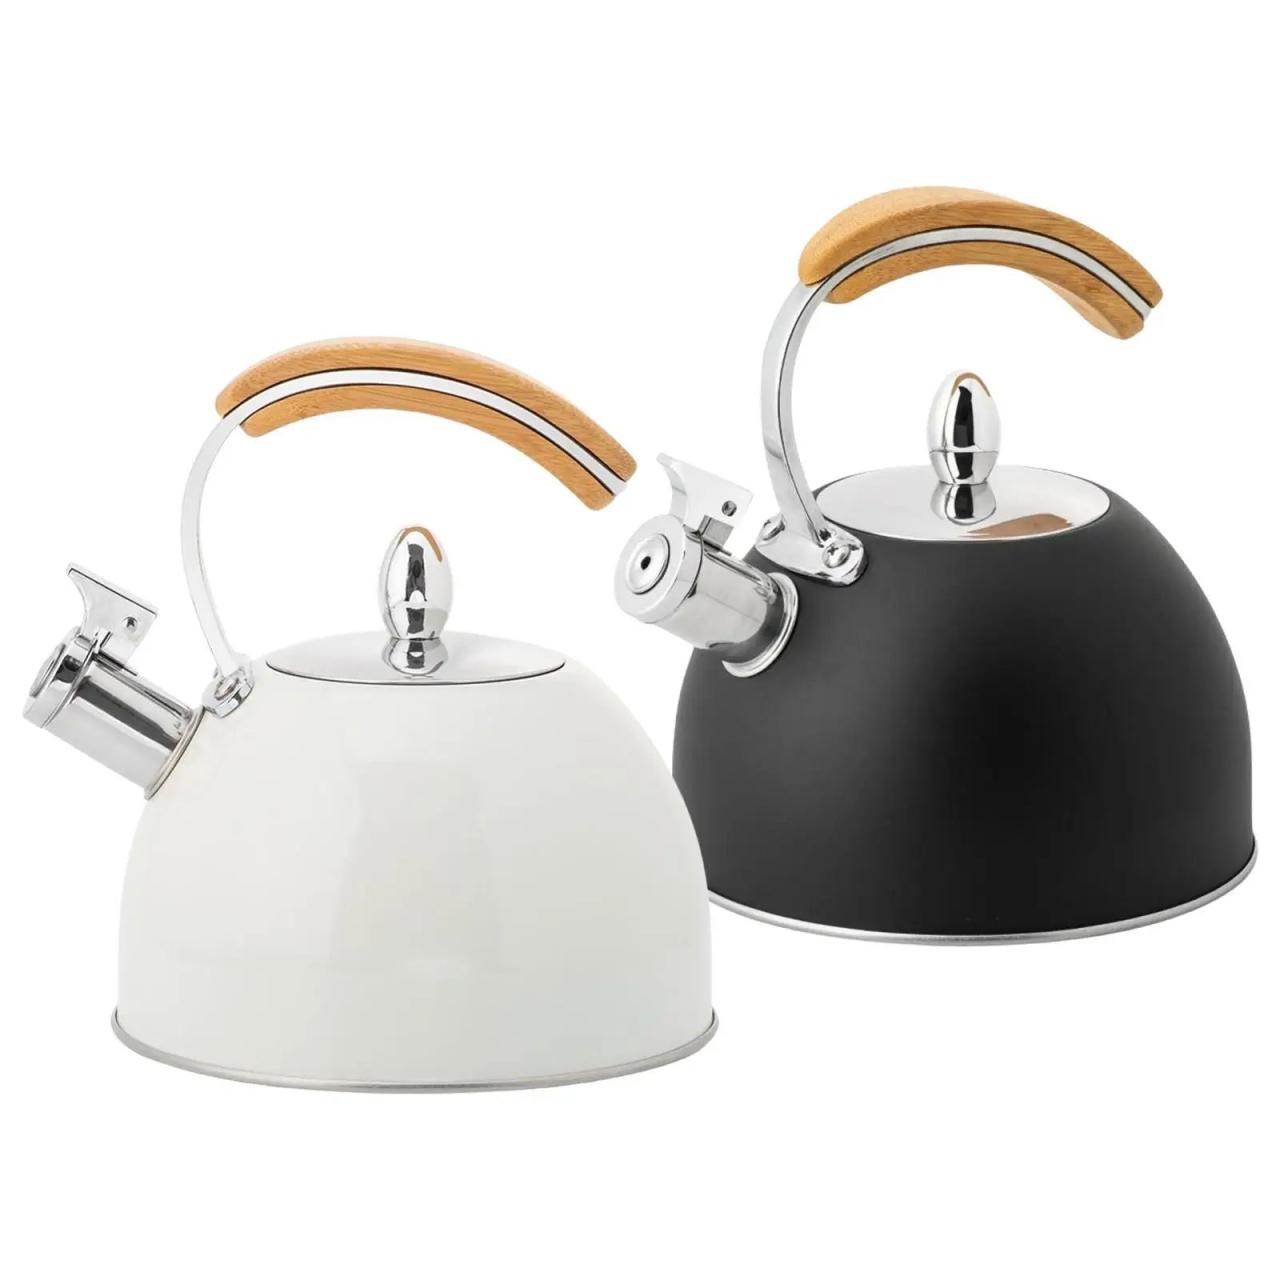 Modern Whistling Tea Kettle With Wood Handle 2-pack